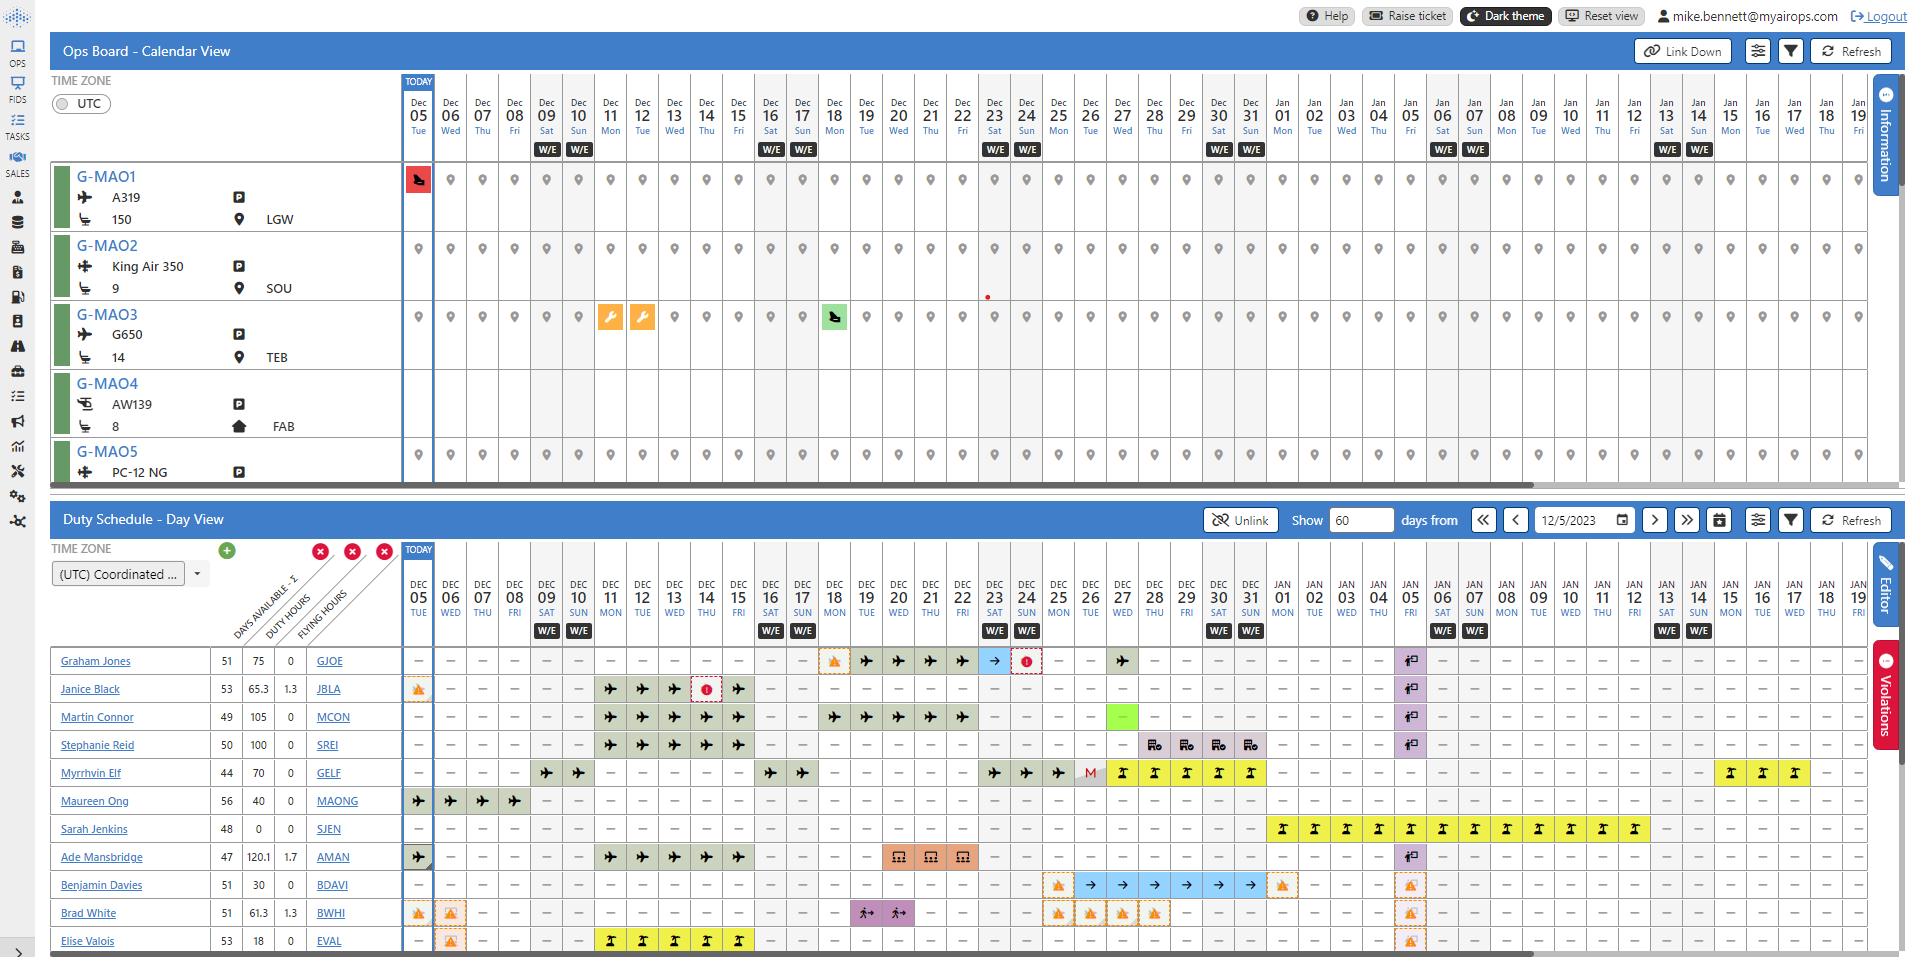 Image of the myairops flight split view dashboard with the ops board on top and the duty schedule view below.